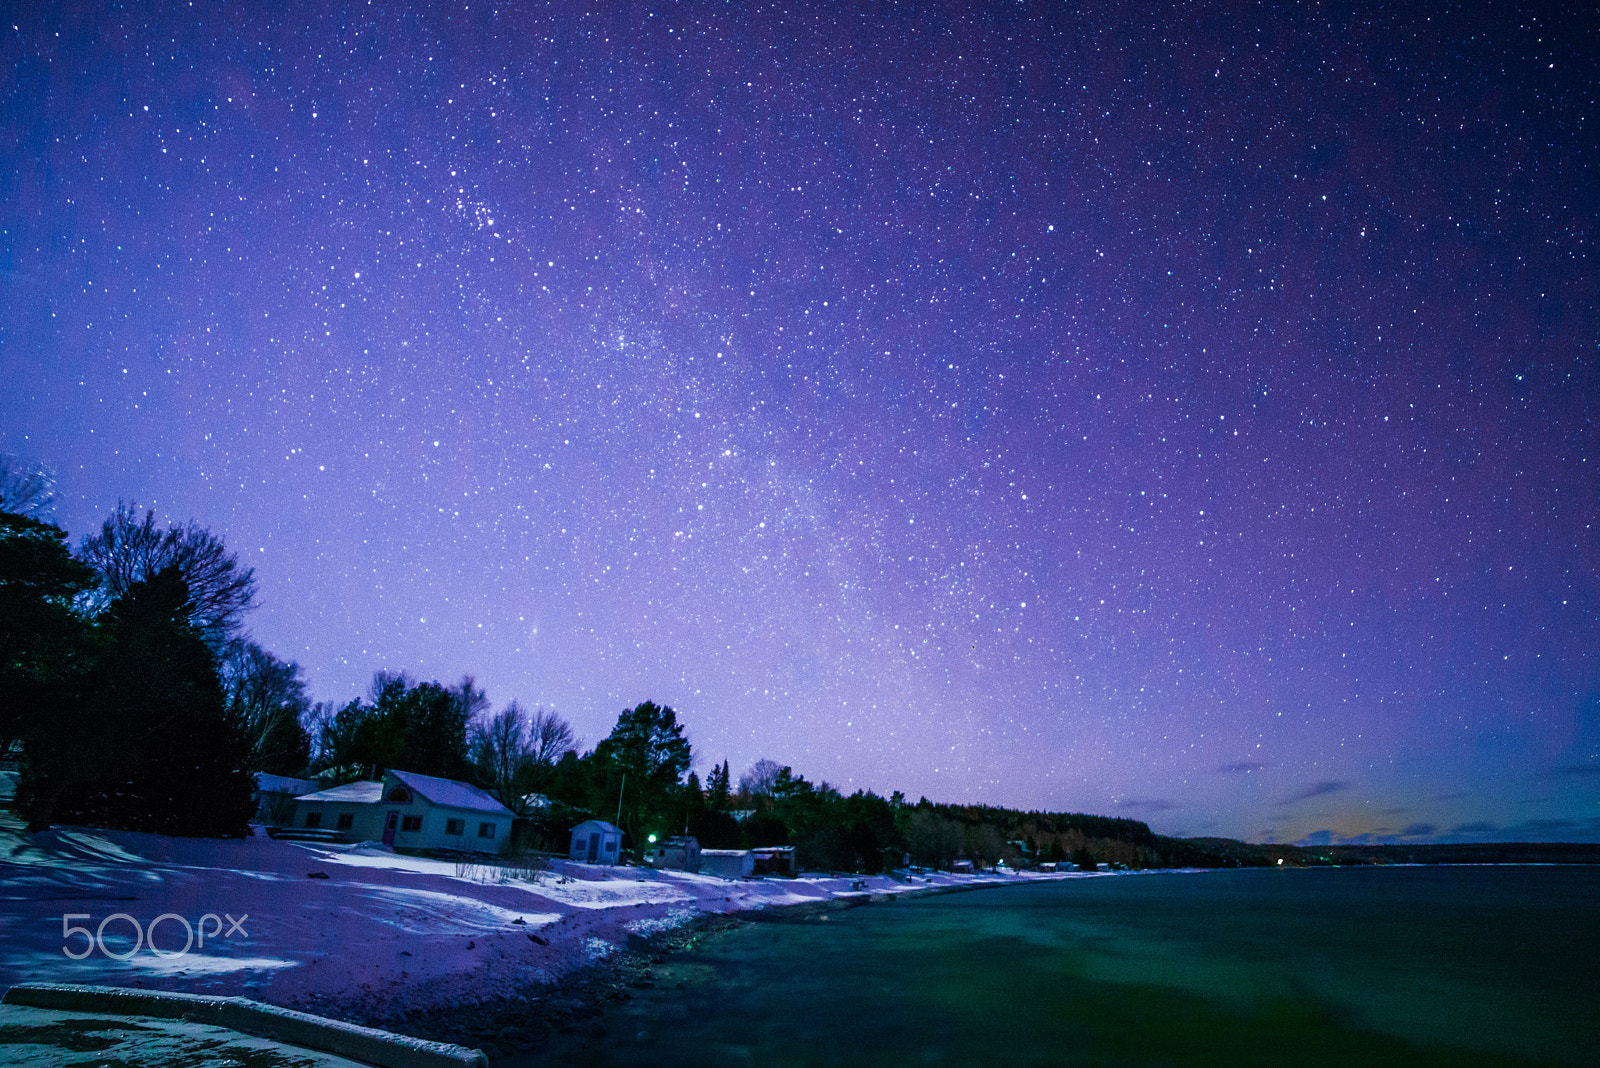 Nikon D800 sample photo. Dyers bay, bruce peninsula at night time with milky way and star photography